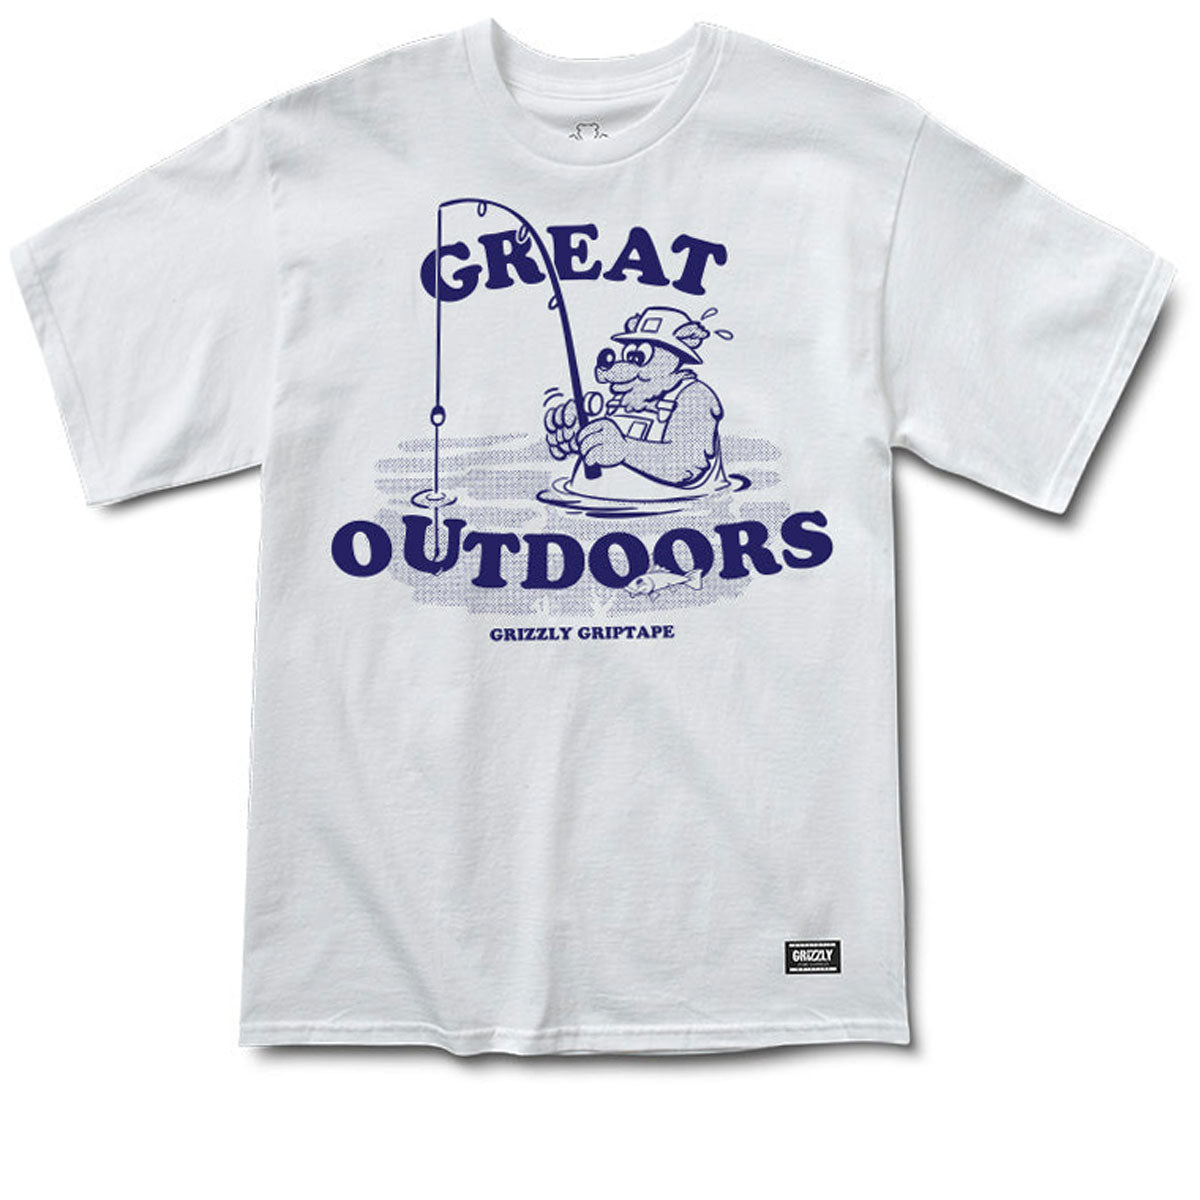 Grizzly Catch Of The Day T-Shirt - White image 1